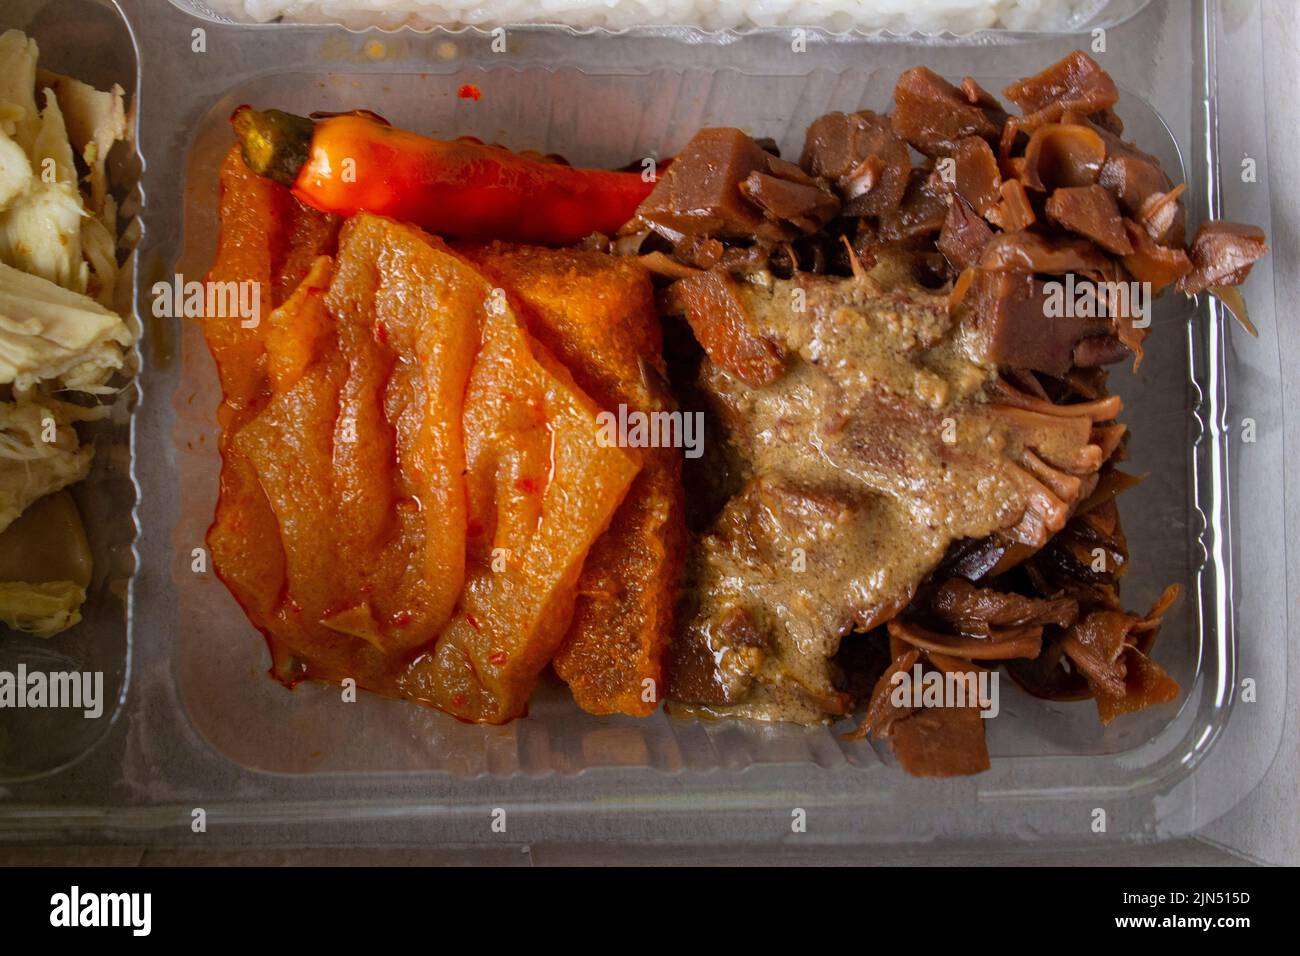 lunch boxes gudeg are similar to Bento boxes - rice boxes, rice, catering boxes, food services (rice warm, sweet eggs, krecek, tofu, tempeh, pieces of Stock Photo